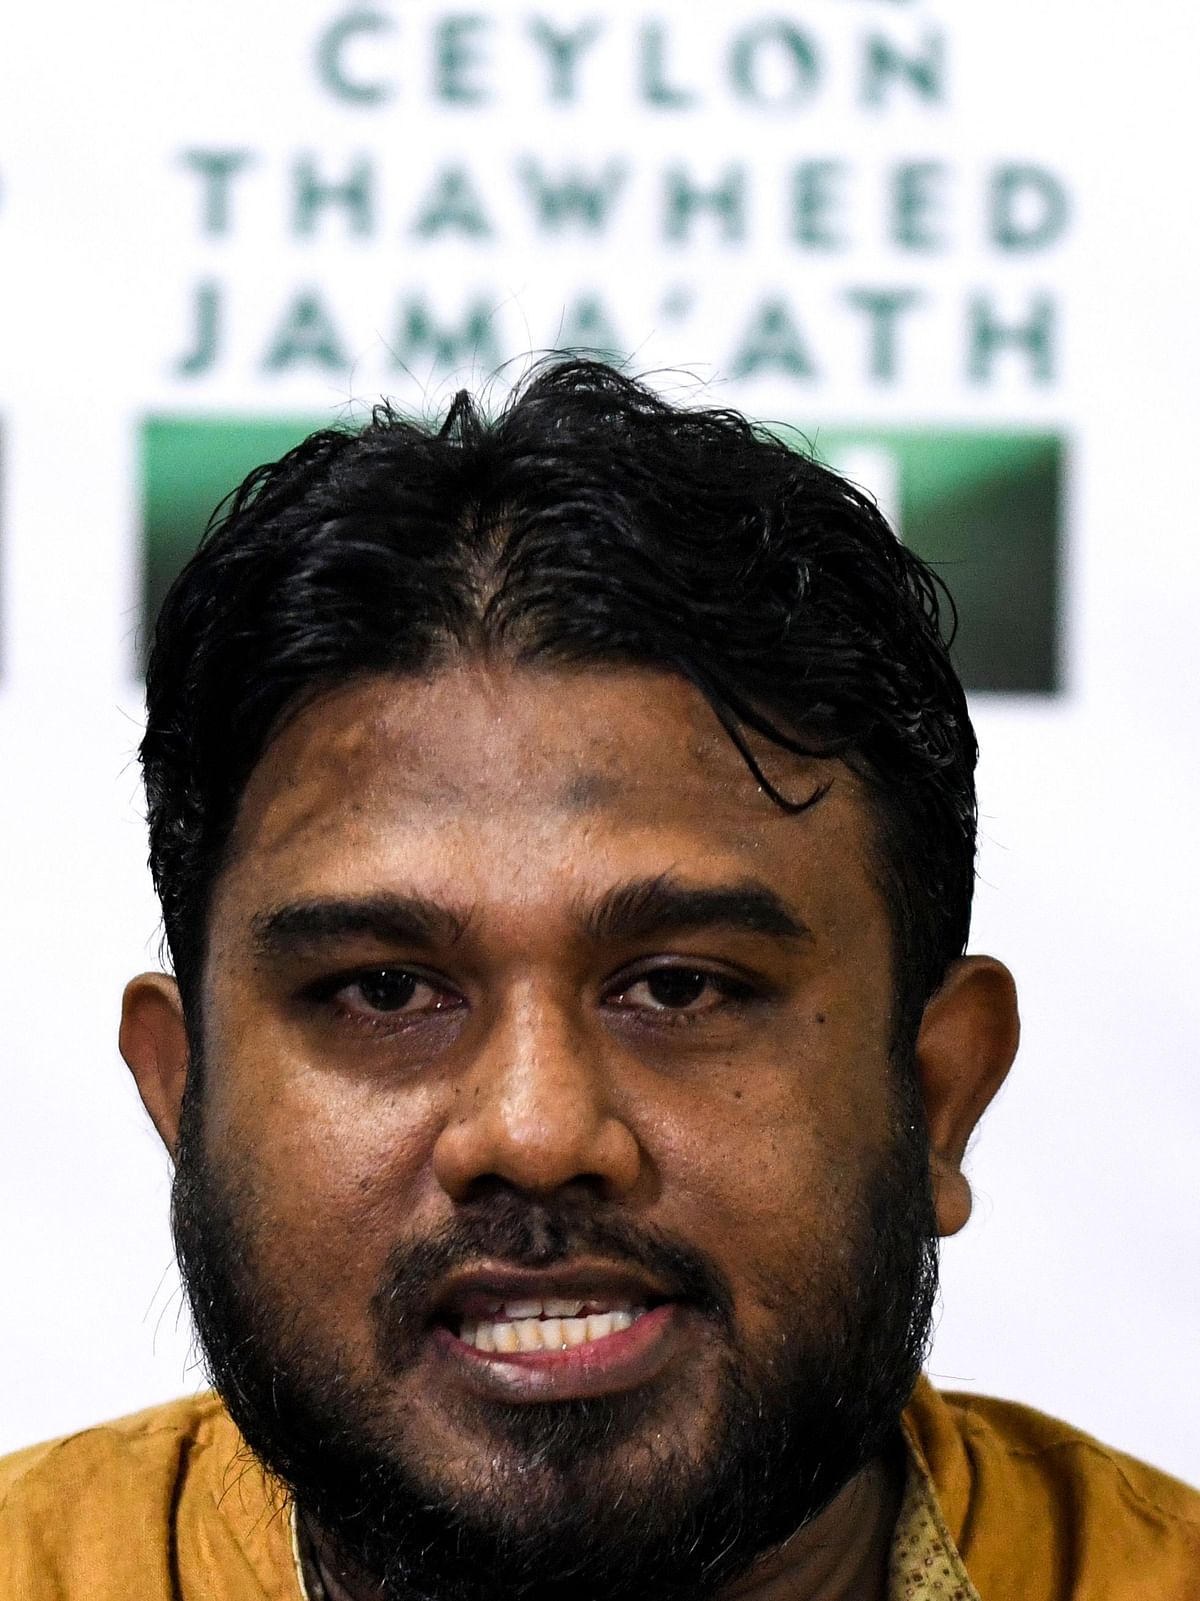 In this photo taken on 2 May 2019, R. Abdul Razik, a leader of the moderate Ceylon Thowheed Jama`ath (CTJ) group, speaks during a press conference in Colombo. While Sri Lanka Easter suicide attacks mastermind Zahran Hashim made public calls for the death of non-Muslims, he worked for months in private chatrooms to persuade six young men to sacrifice themselves, Muslim community leaders say. Photo: AFP